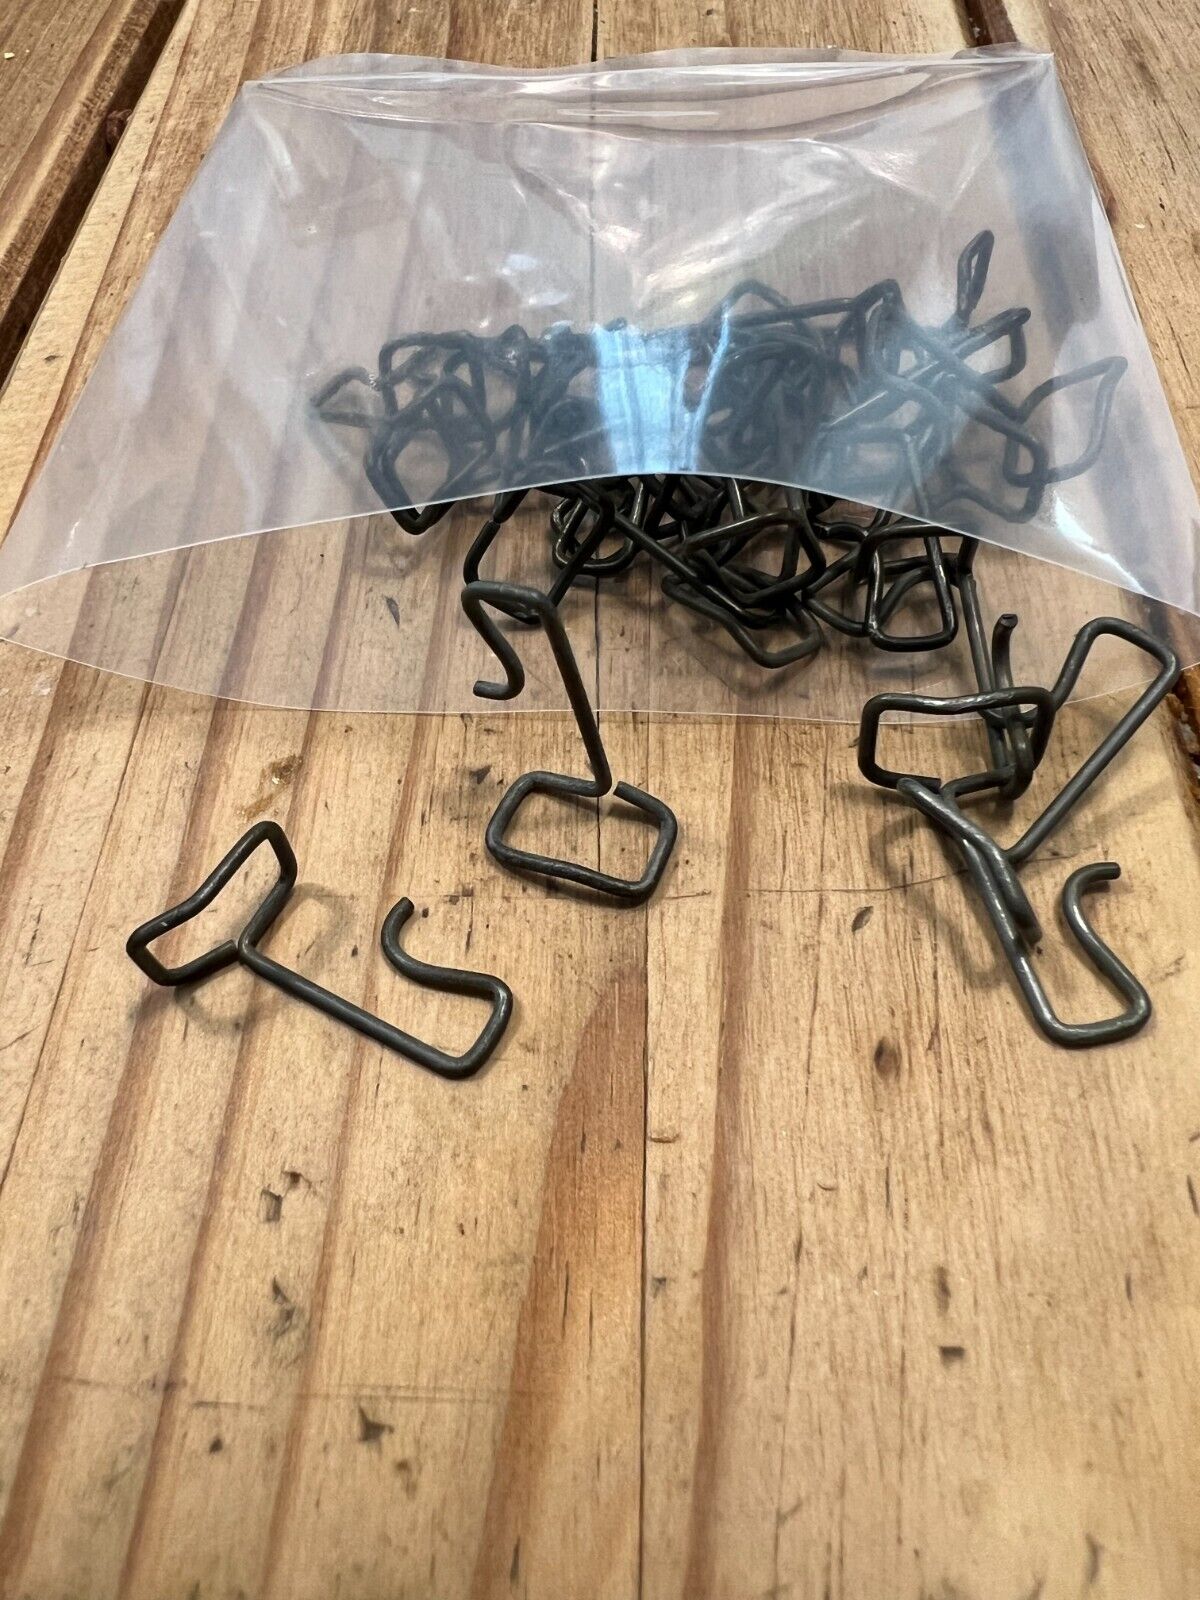 25 EACH OLD STYLE SAFETY CLIP